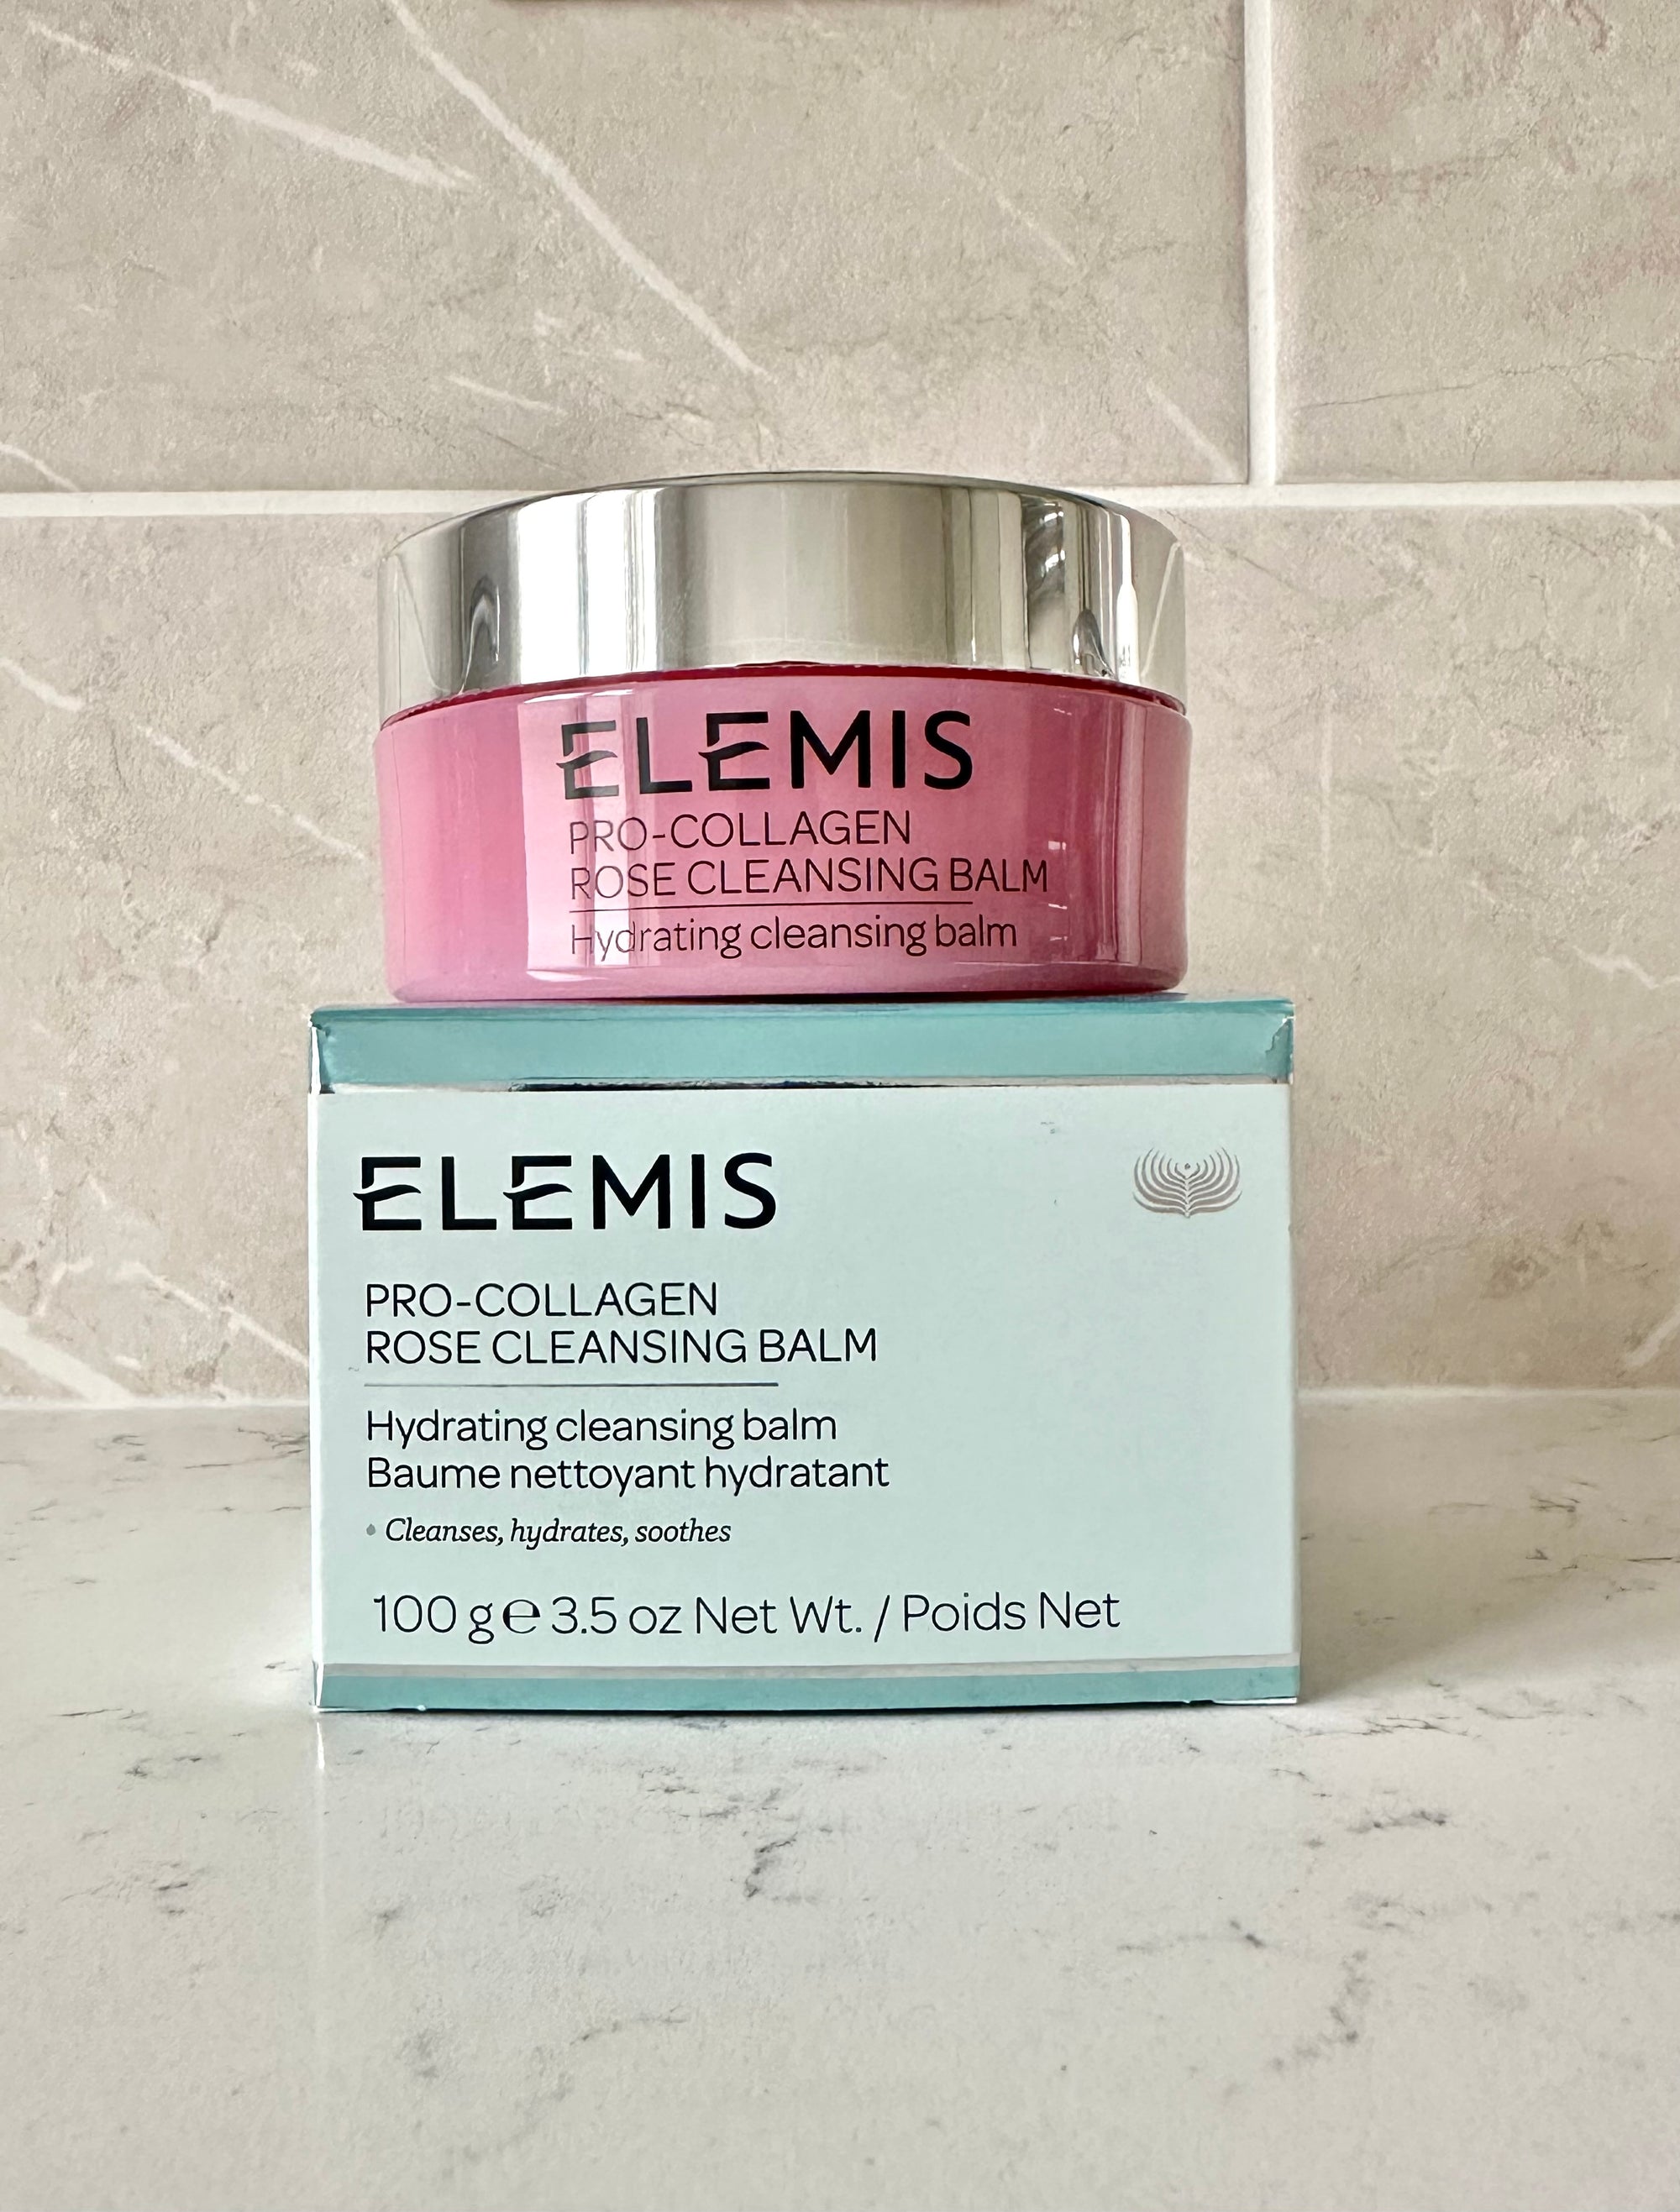 Elemis New Packaging Updates - Beauty Full Time